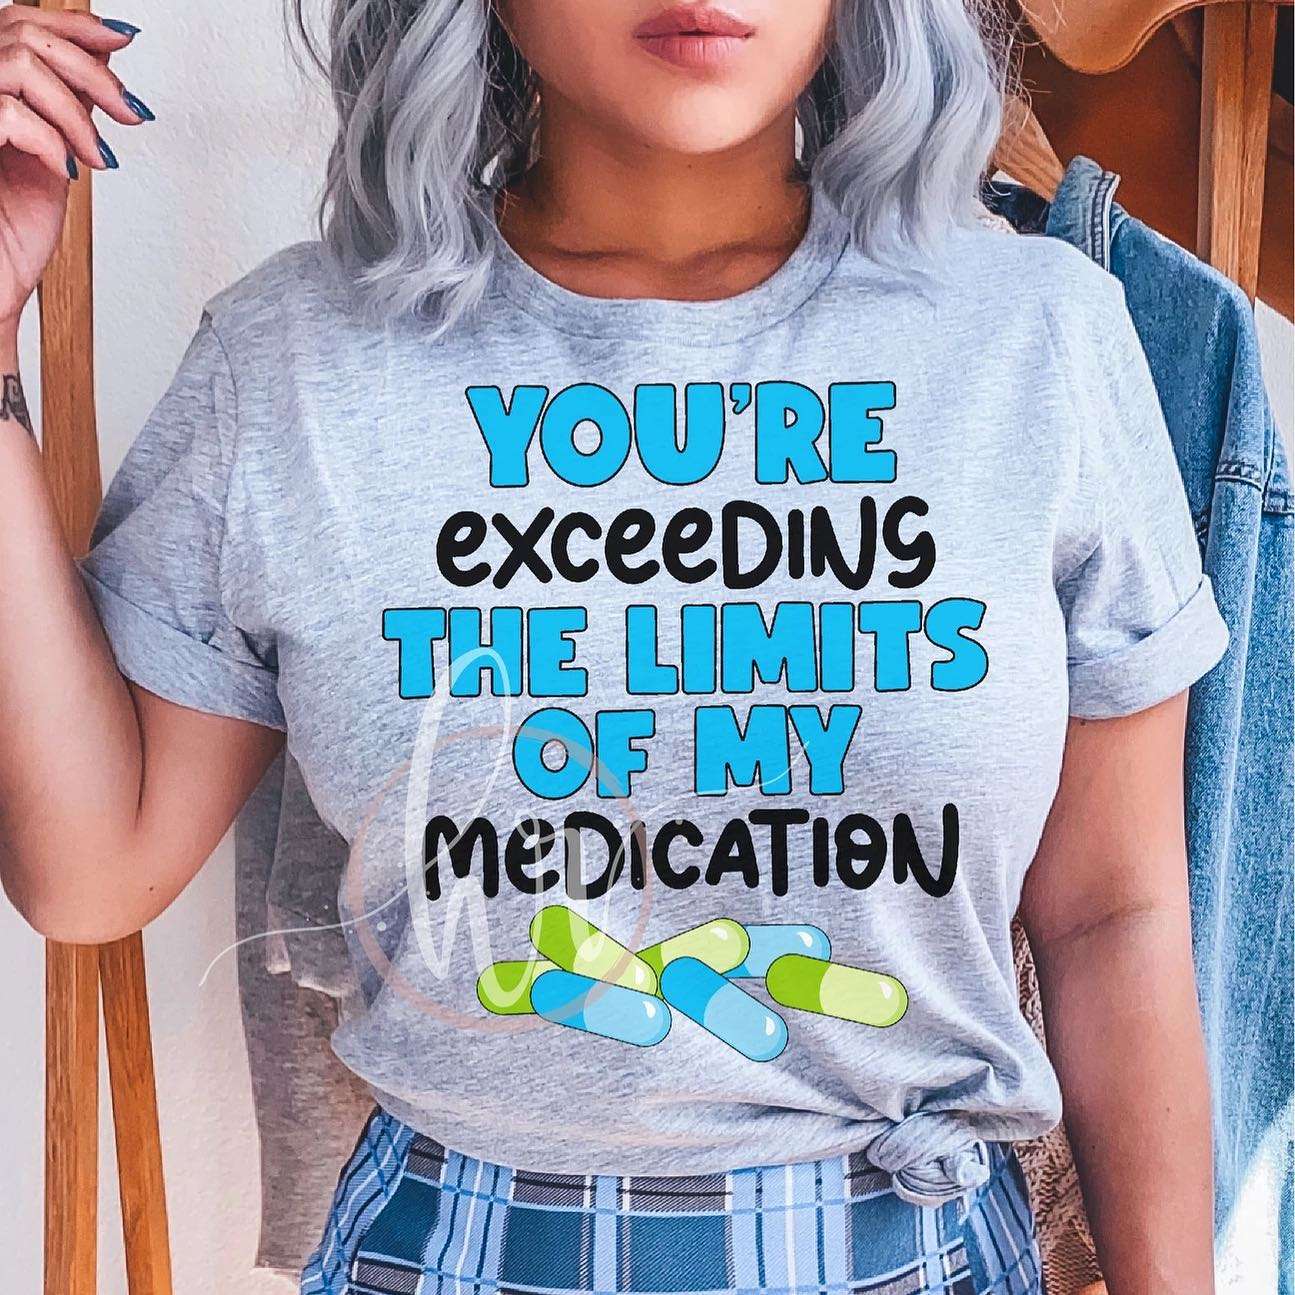 You're exceedins the limits of my medication